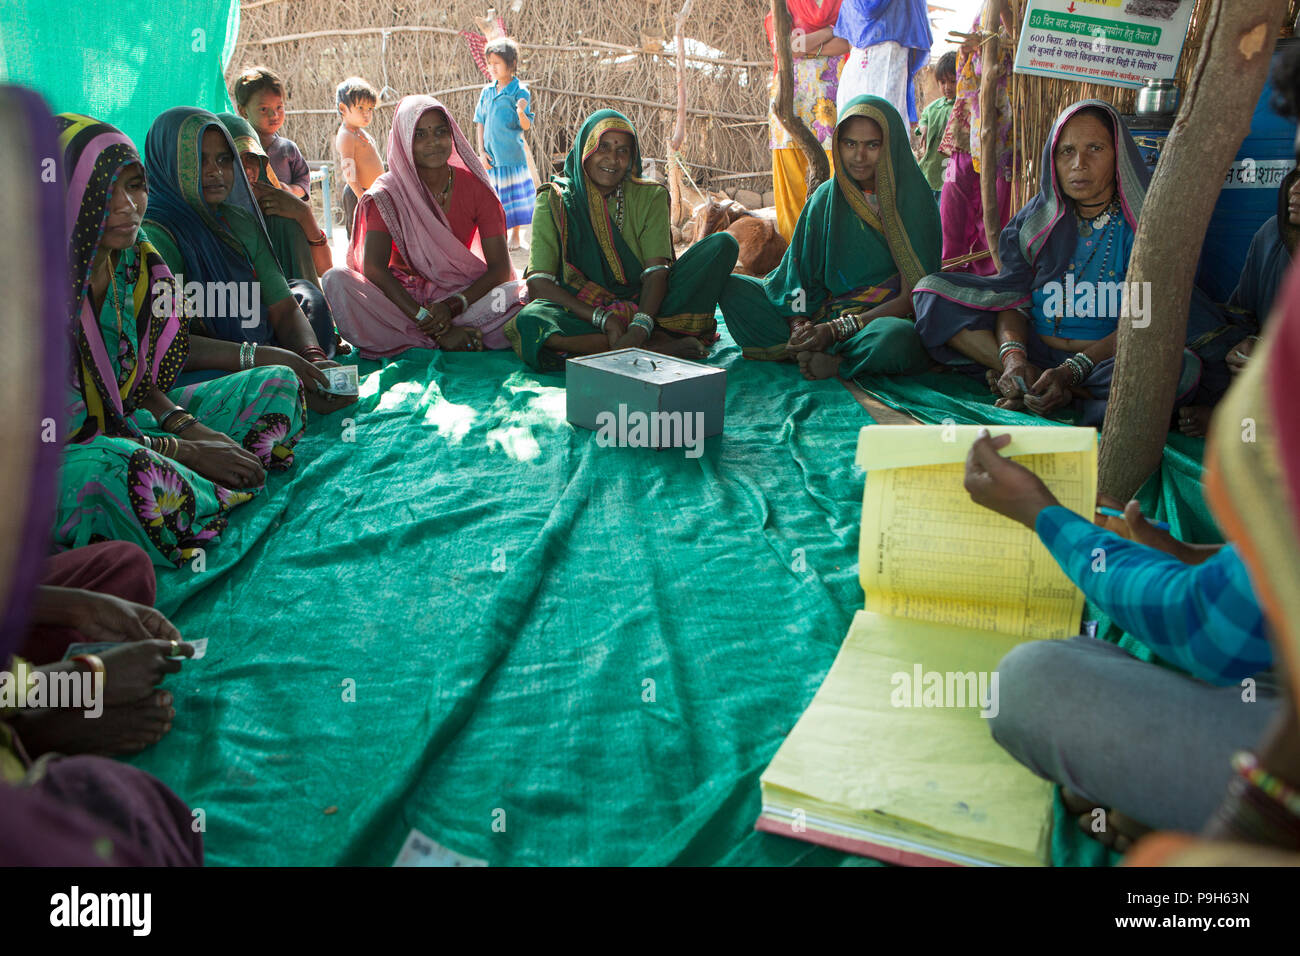 A local farmer training school meet to share their loan money and learn about making organic fertiliser for their farms, Madhya Pradesh, India. Stock Photo